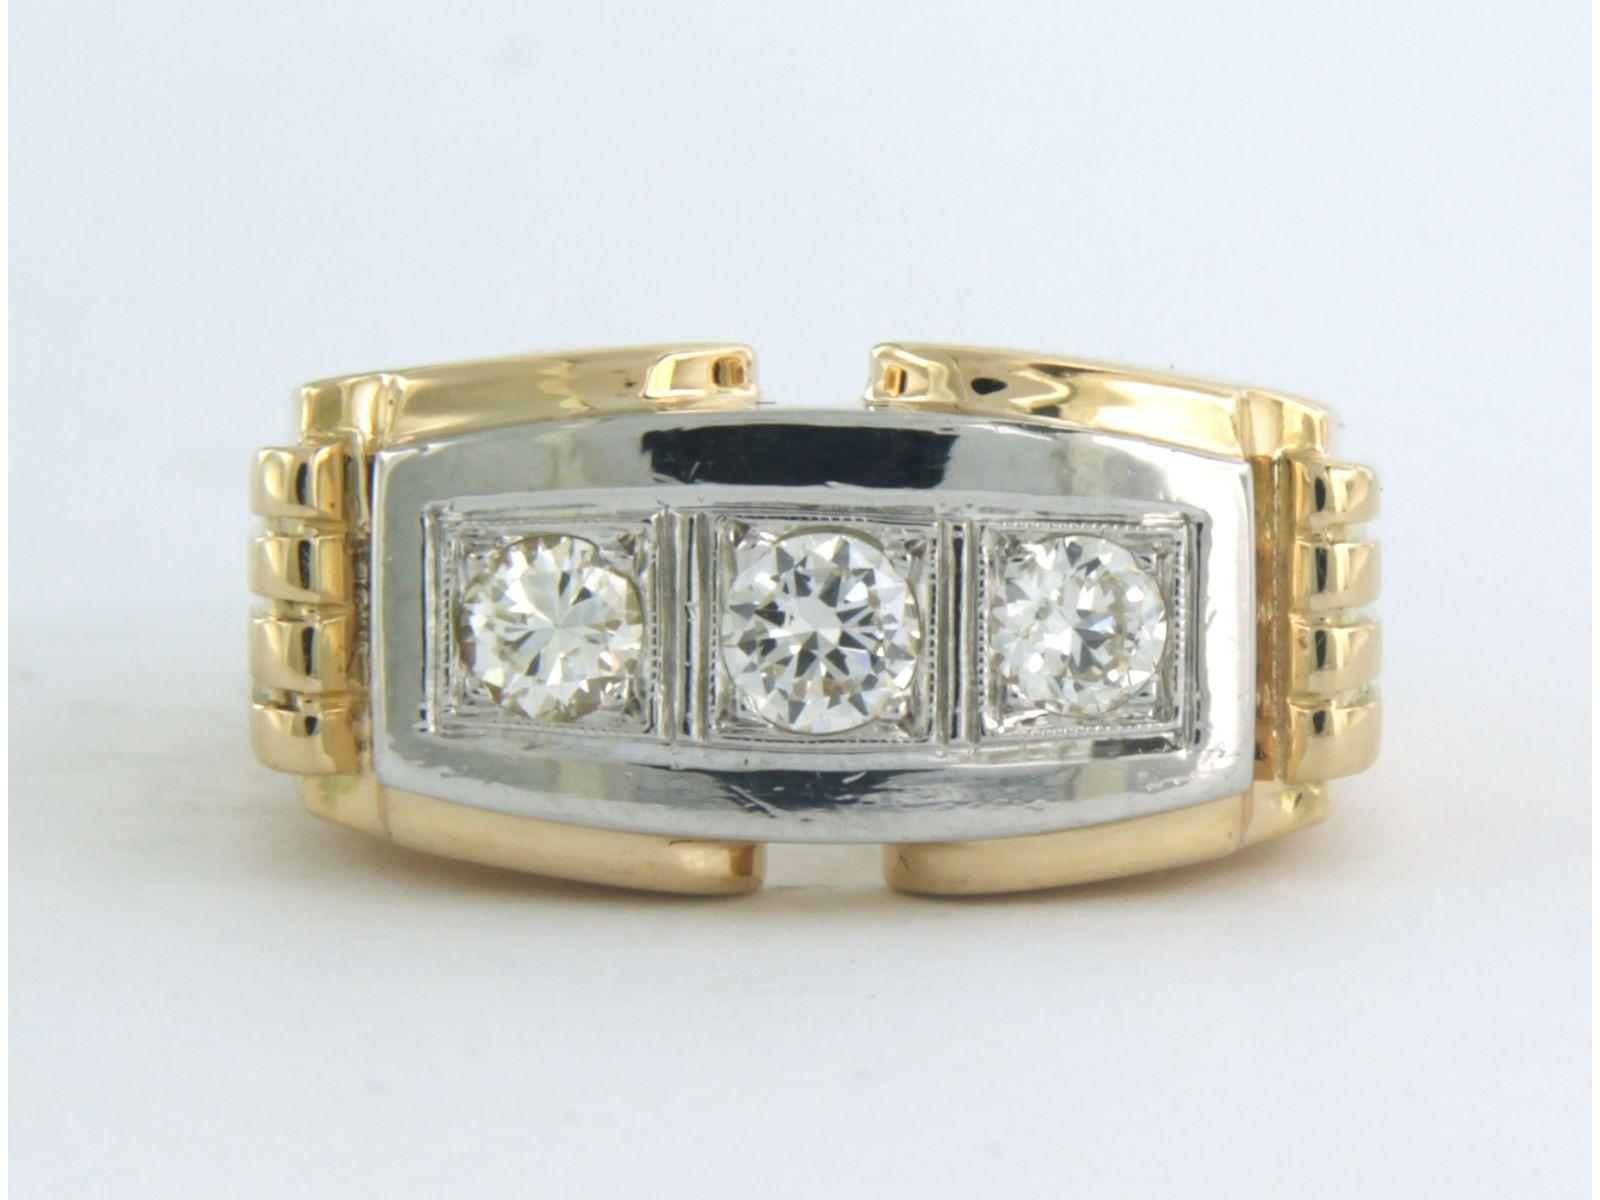 18k bicolour ring set with old European cut diamonds up to . 0.50ct - G/H - VS/SI - ring size U.S. 9.25 - EU. 19.25(60)

detailed description

the top of the ring is 1.1 cm wide

weight 16.6 grams

ring size US 9.25 - EU. 19.25(60), ring can be